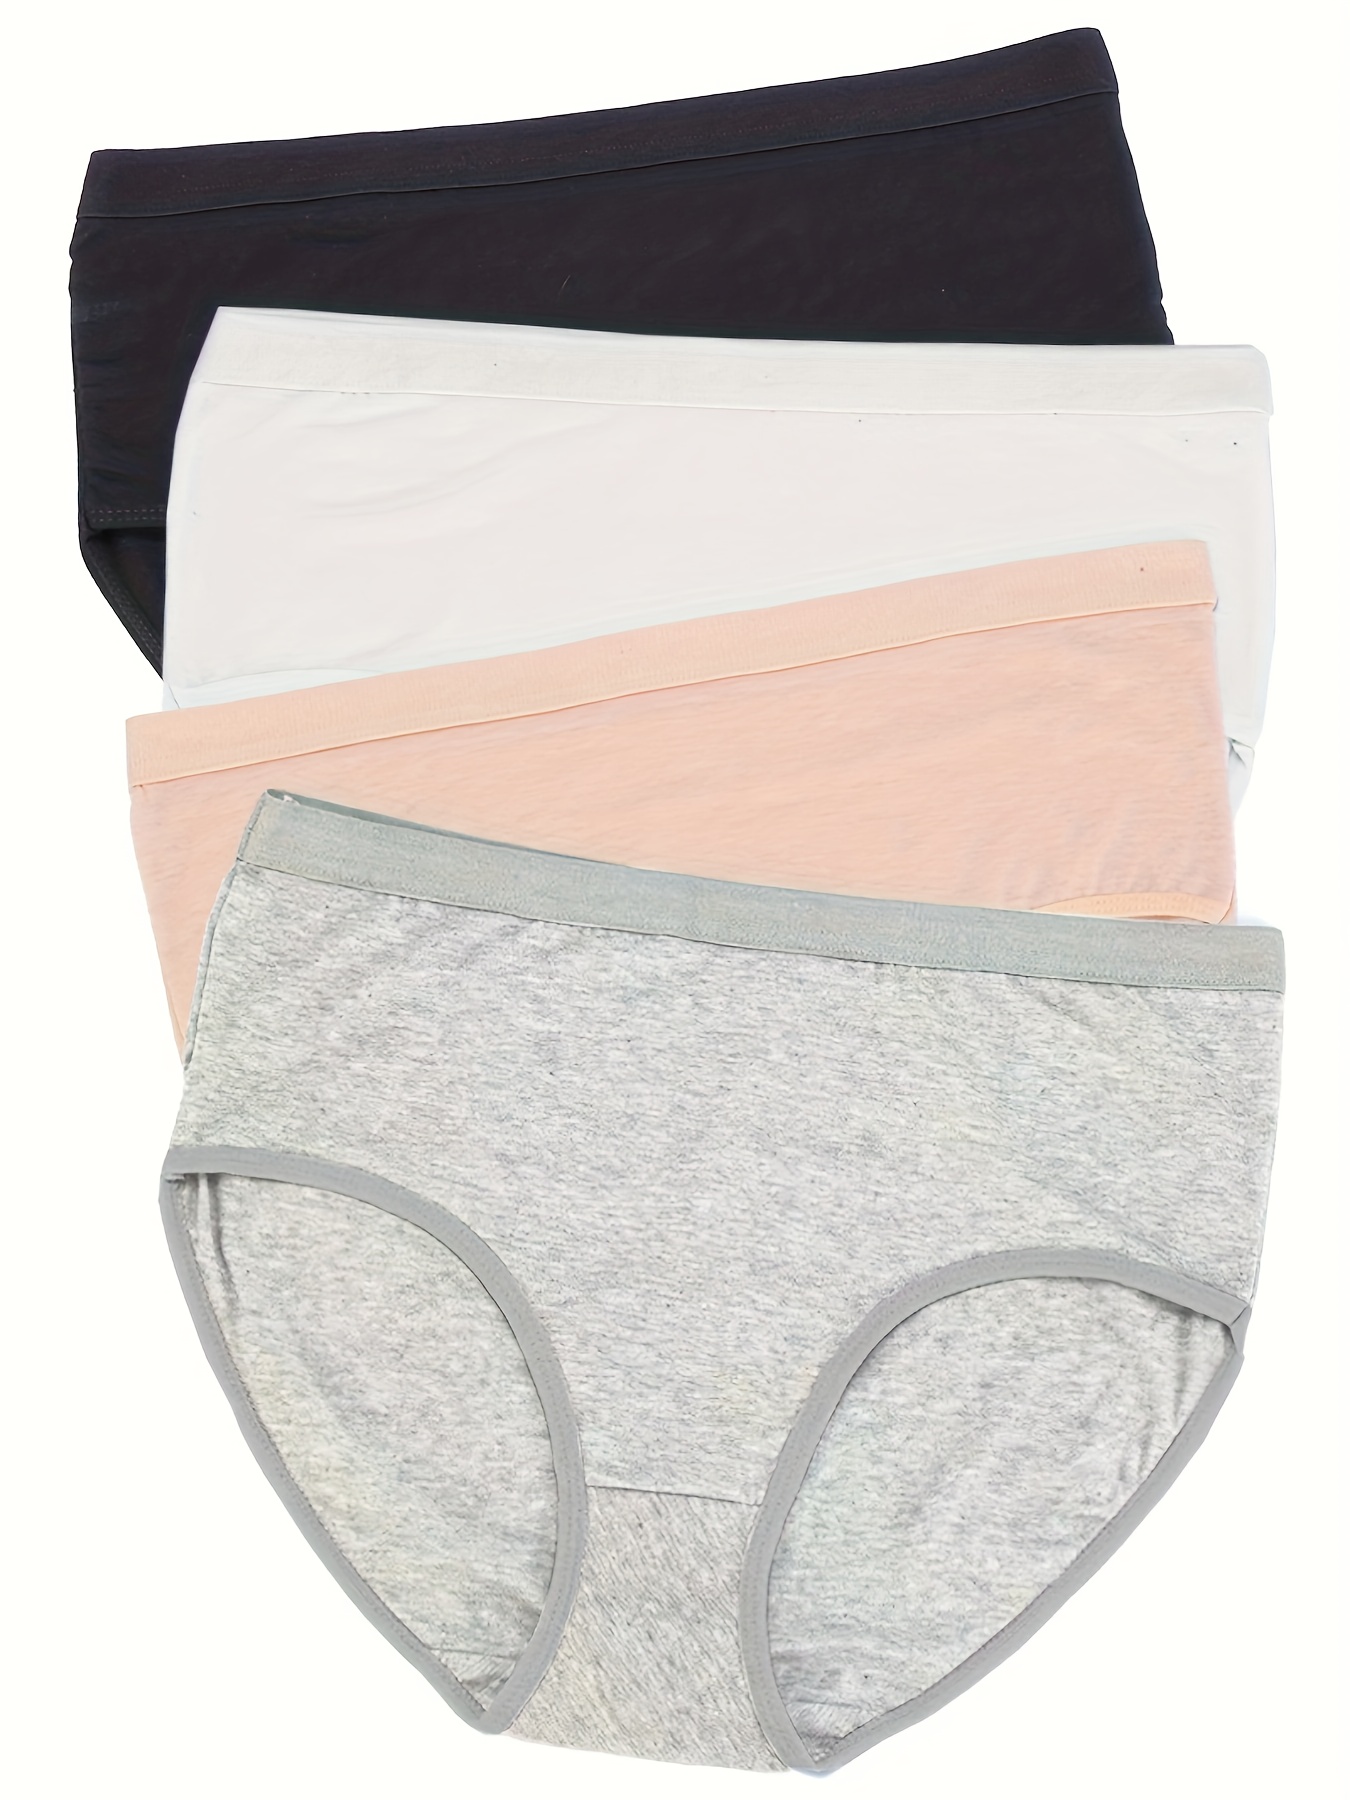 Panties for women Hipster Womens Underwear (pack of 4) –